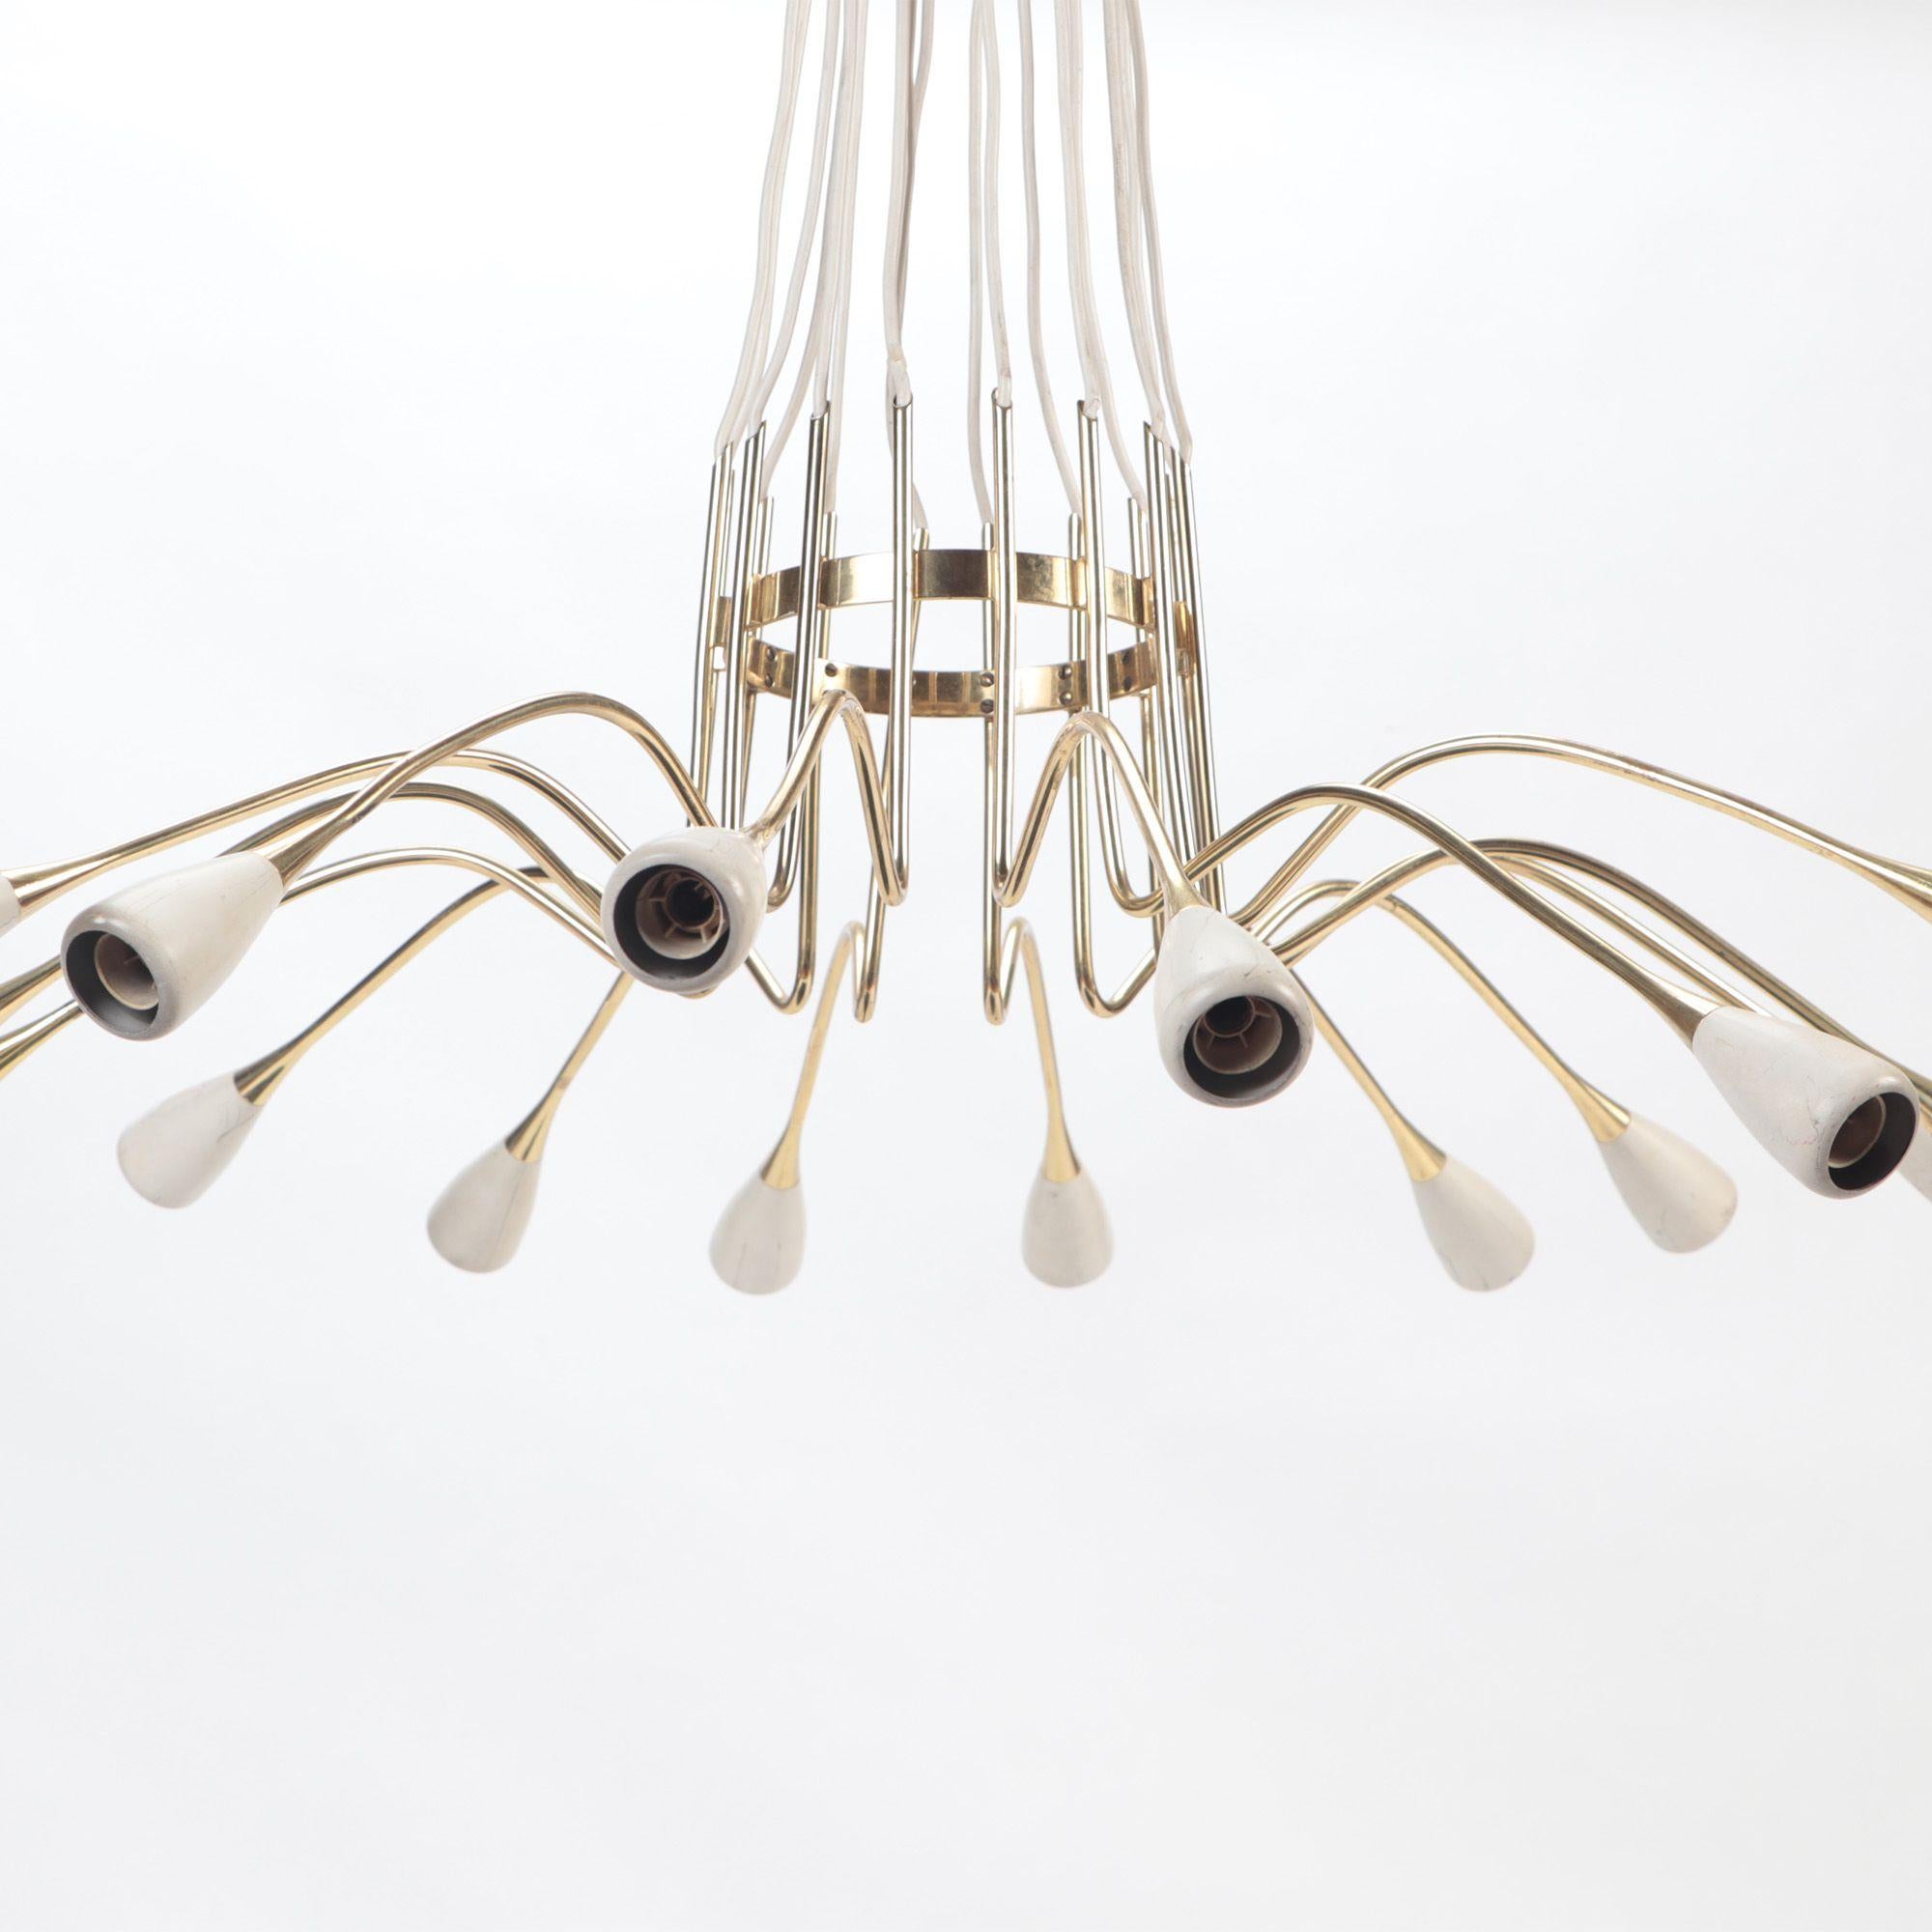 Pair of Italian Brass and Spun Aluminum 16 Arms Chandeliers, circa 1950 For Sale 6